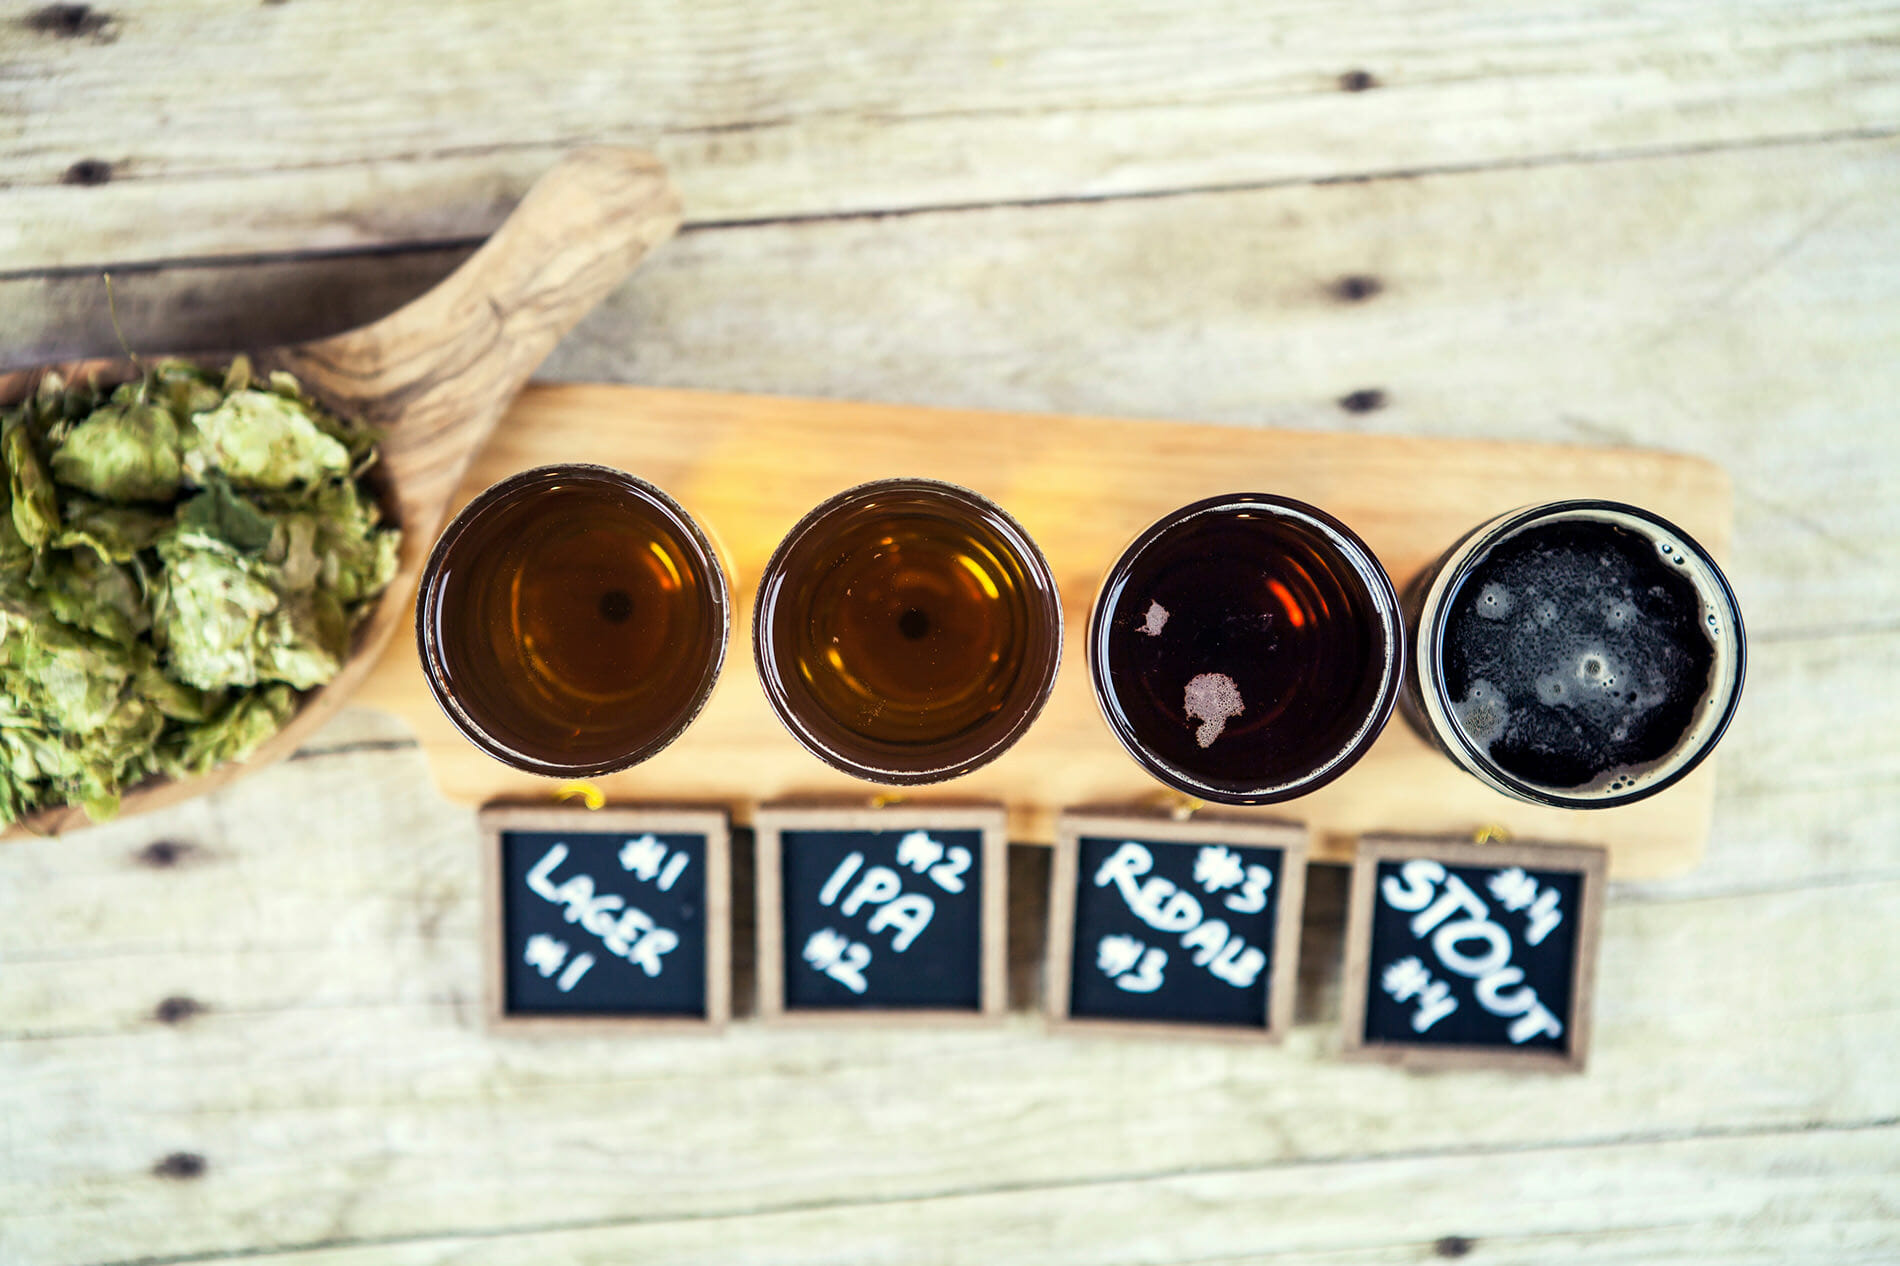 The Best and Worst of Home Brewing